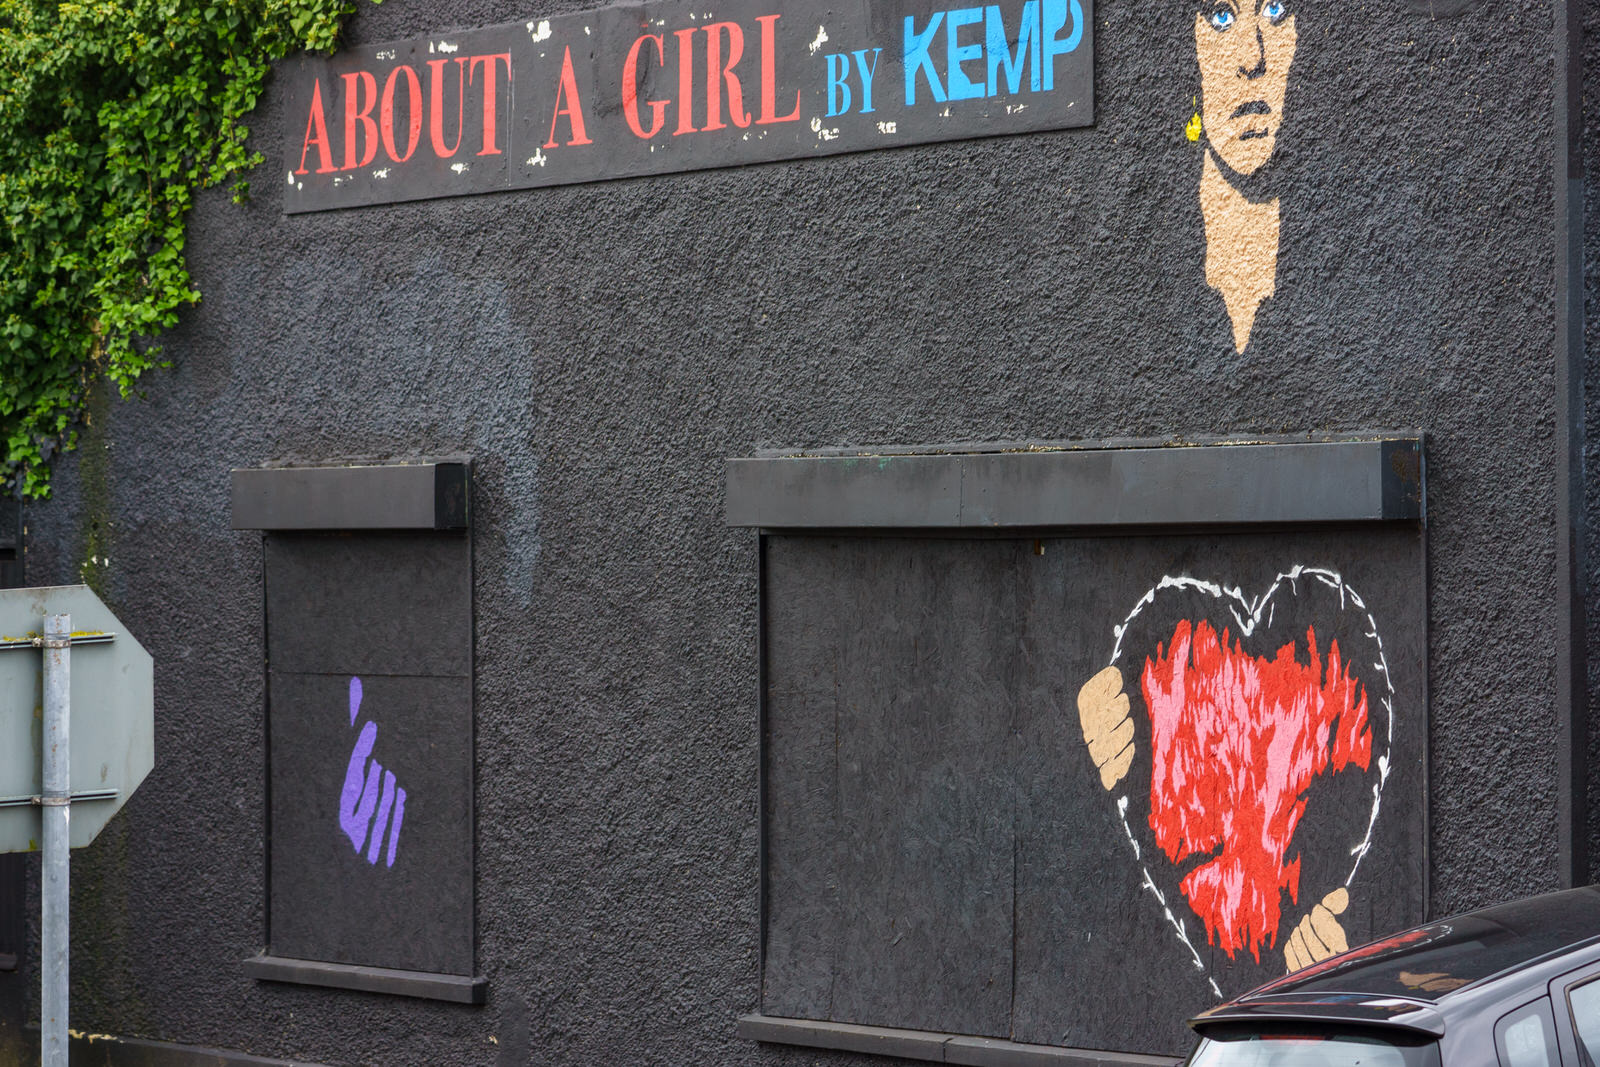 ABOUT A GIRL BY KEMP MAY 2015